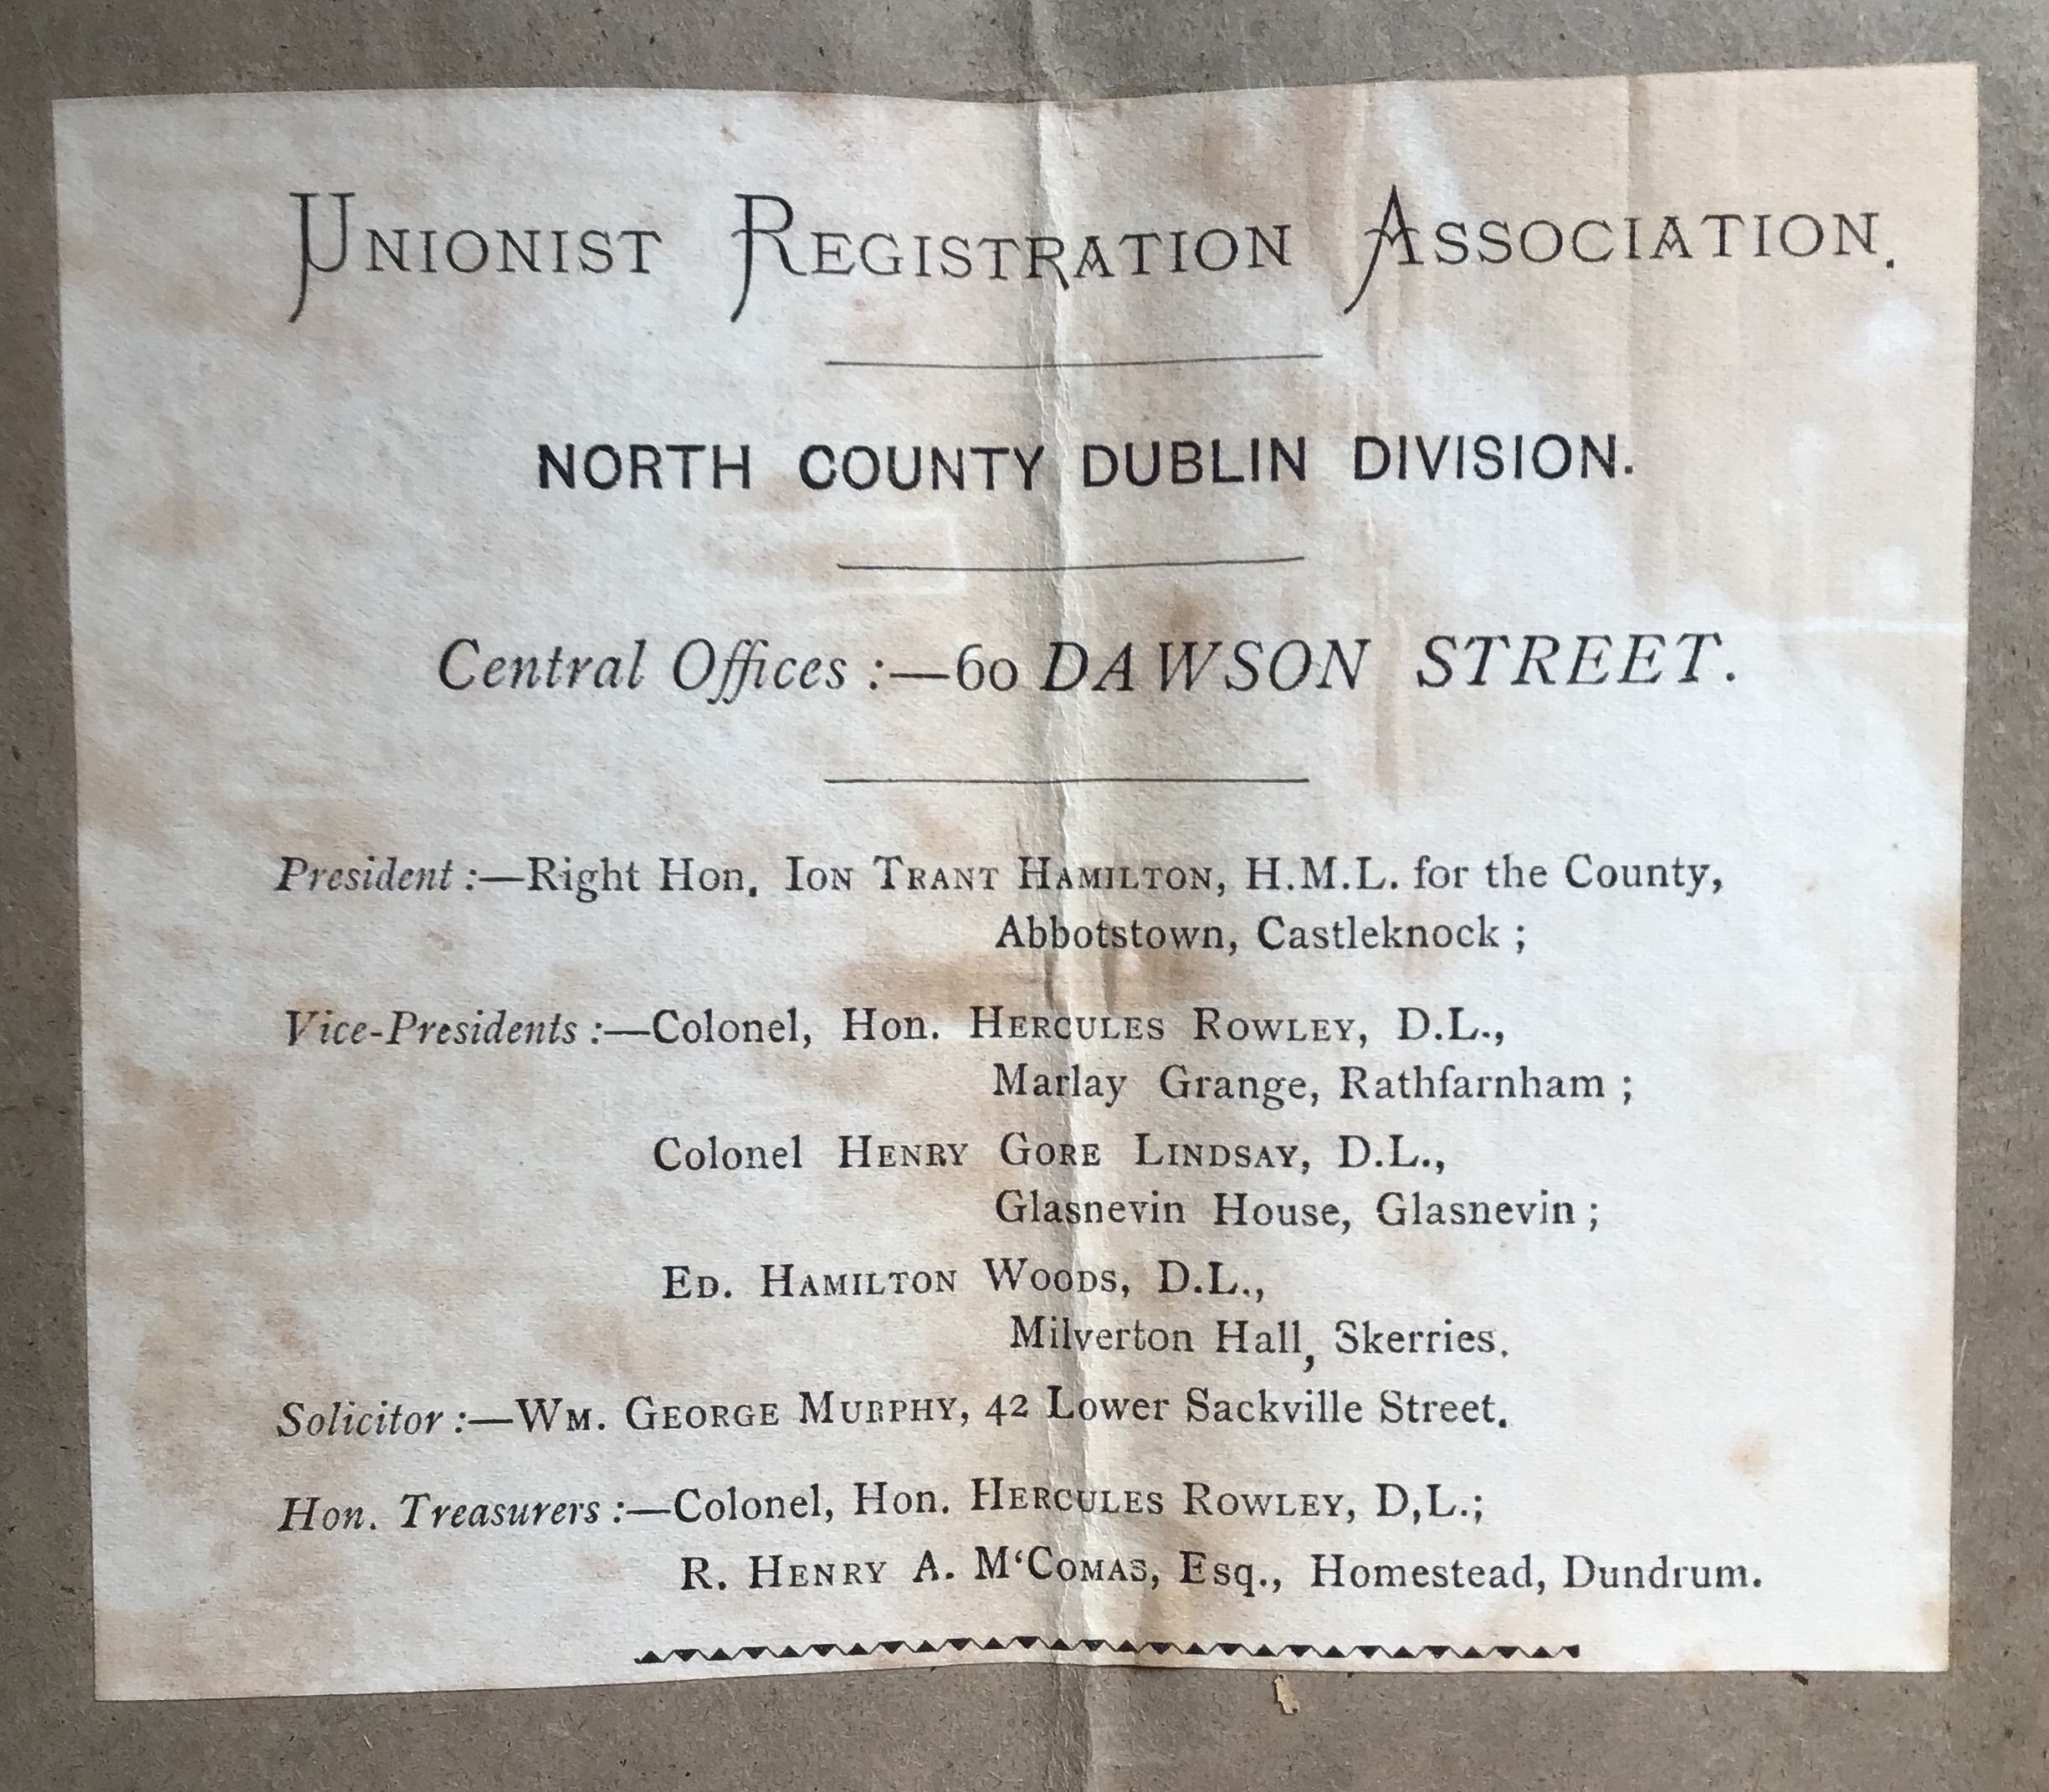 Opposite the first page, the U.R.A. has affixed this stamp, detailing the members of the North County Dublin Division. This was vital in determining the providence of the item.